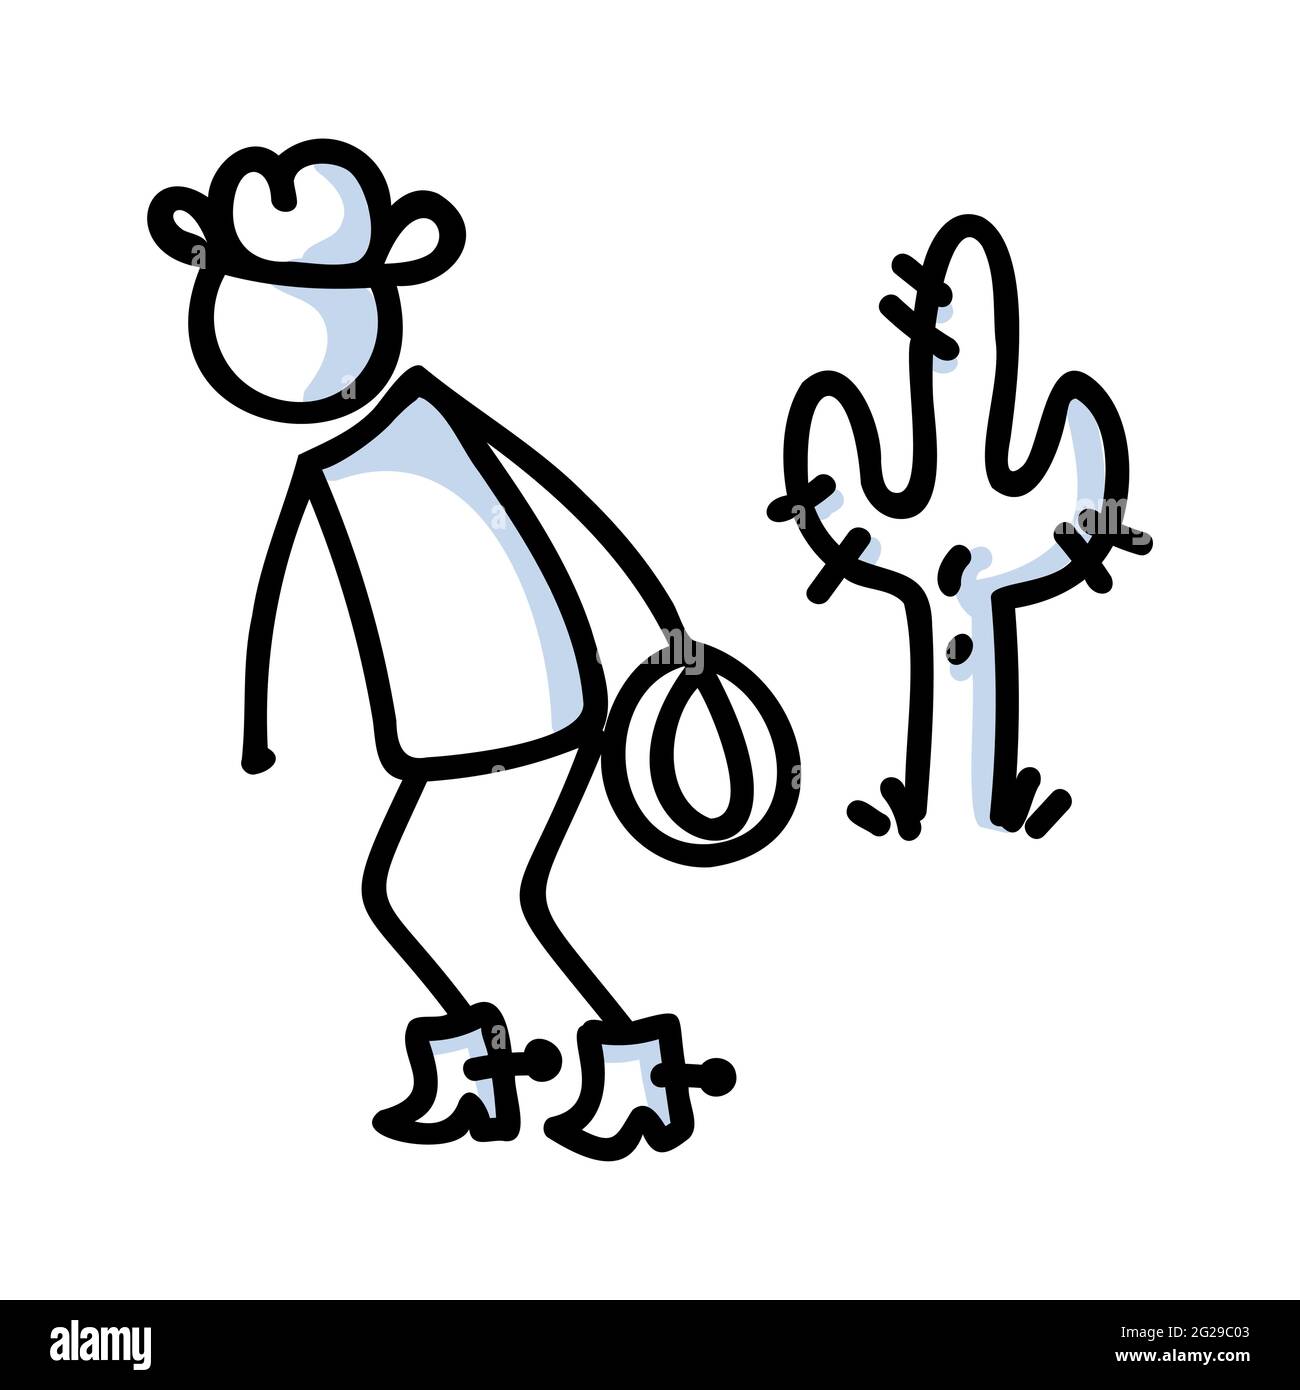 Black and white drawn stick figure of cowboy with lasso clip art. Wild  masculine saguaro cactus for monochrome folk icon sketchnote or illustrated  Stock Vector Image & Art - Alamy